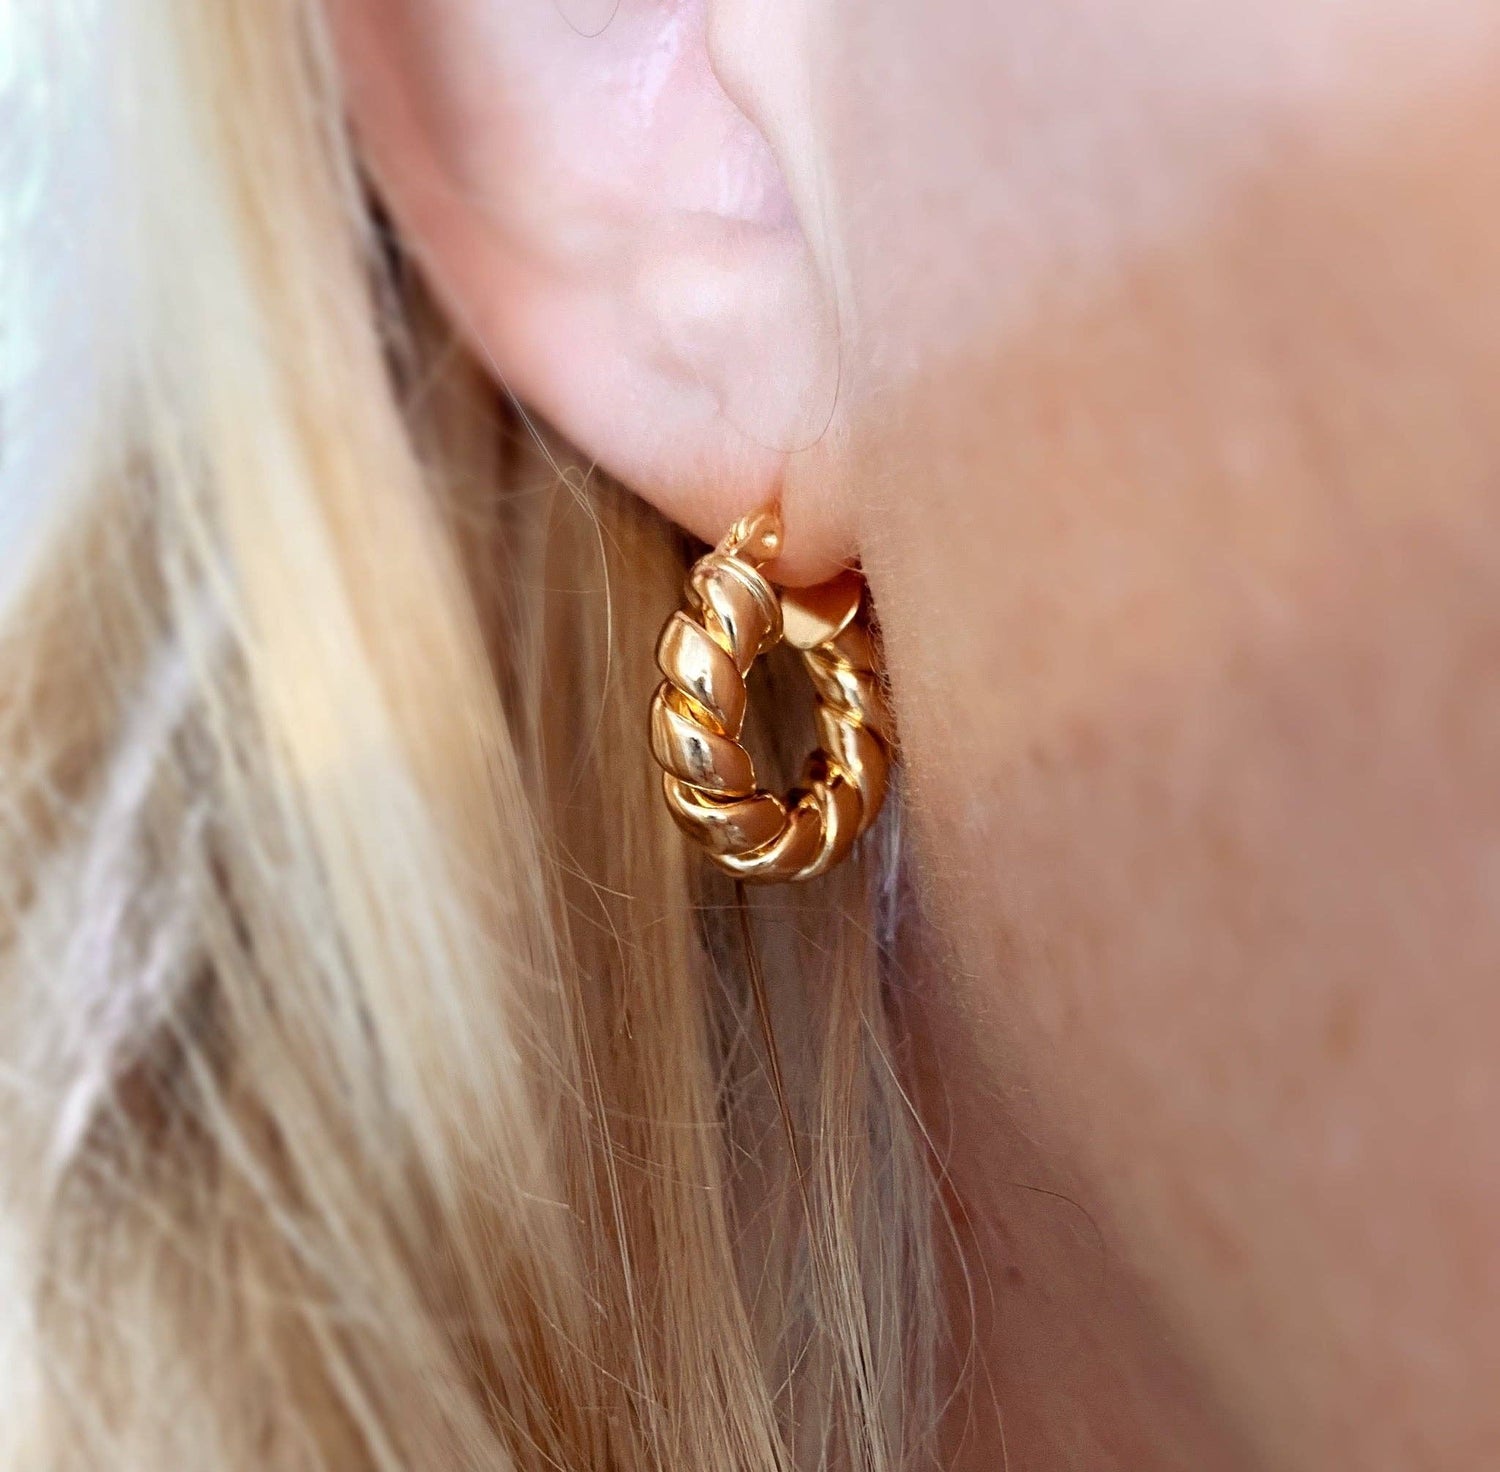 18k Gold Filled Twisted Tube Hoop Earrings - The Croissant Hoops: 20mm